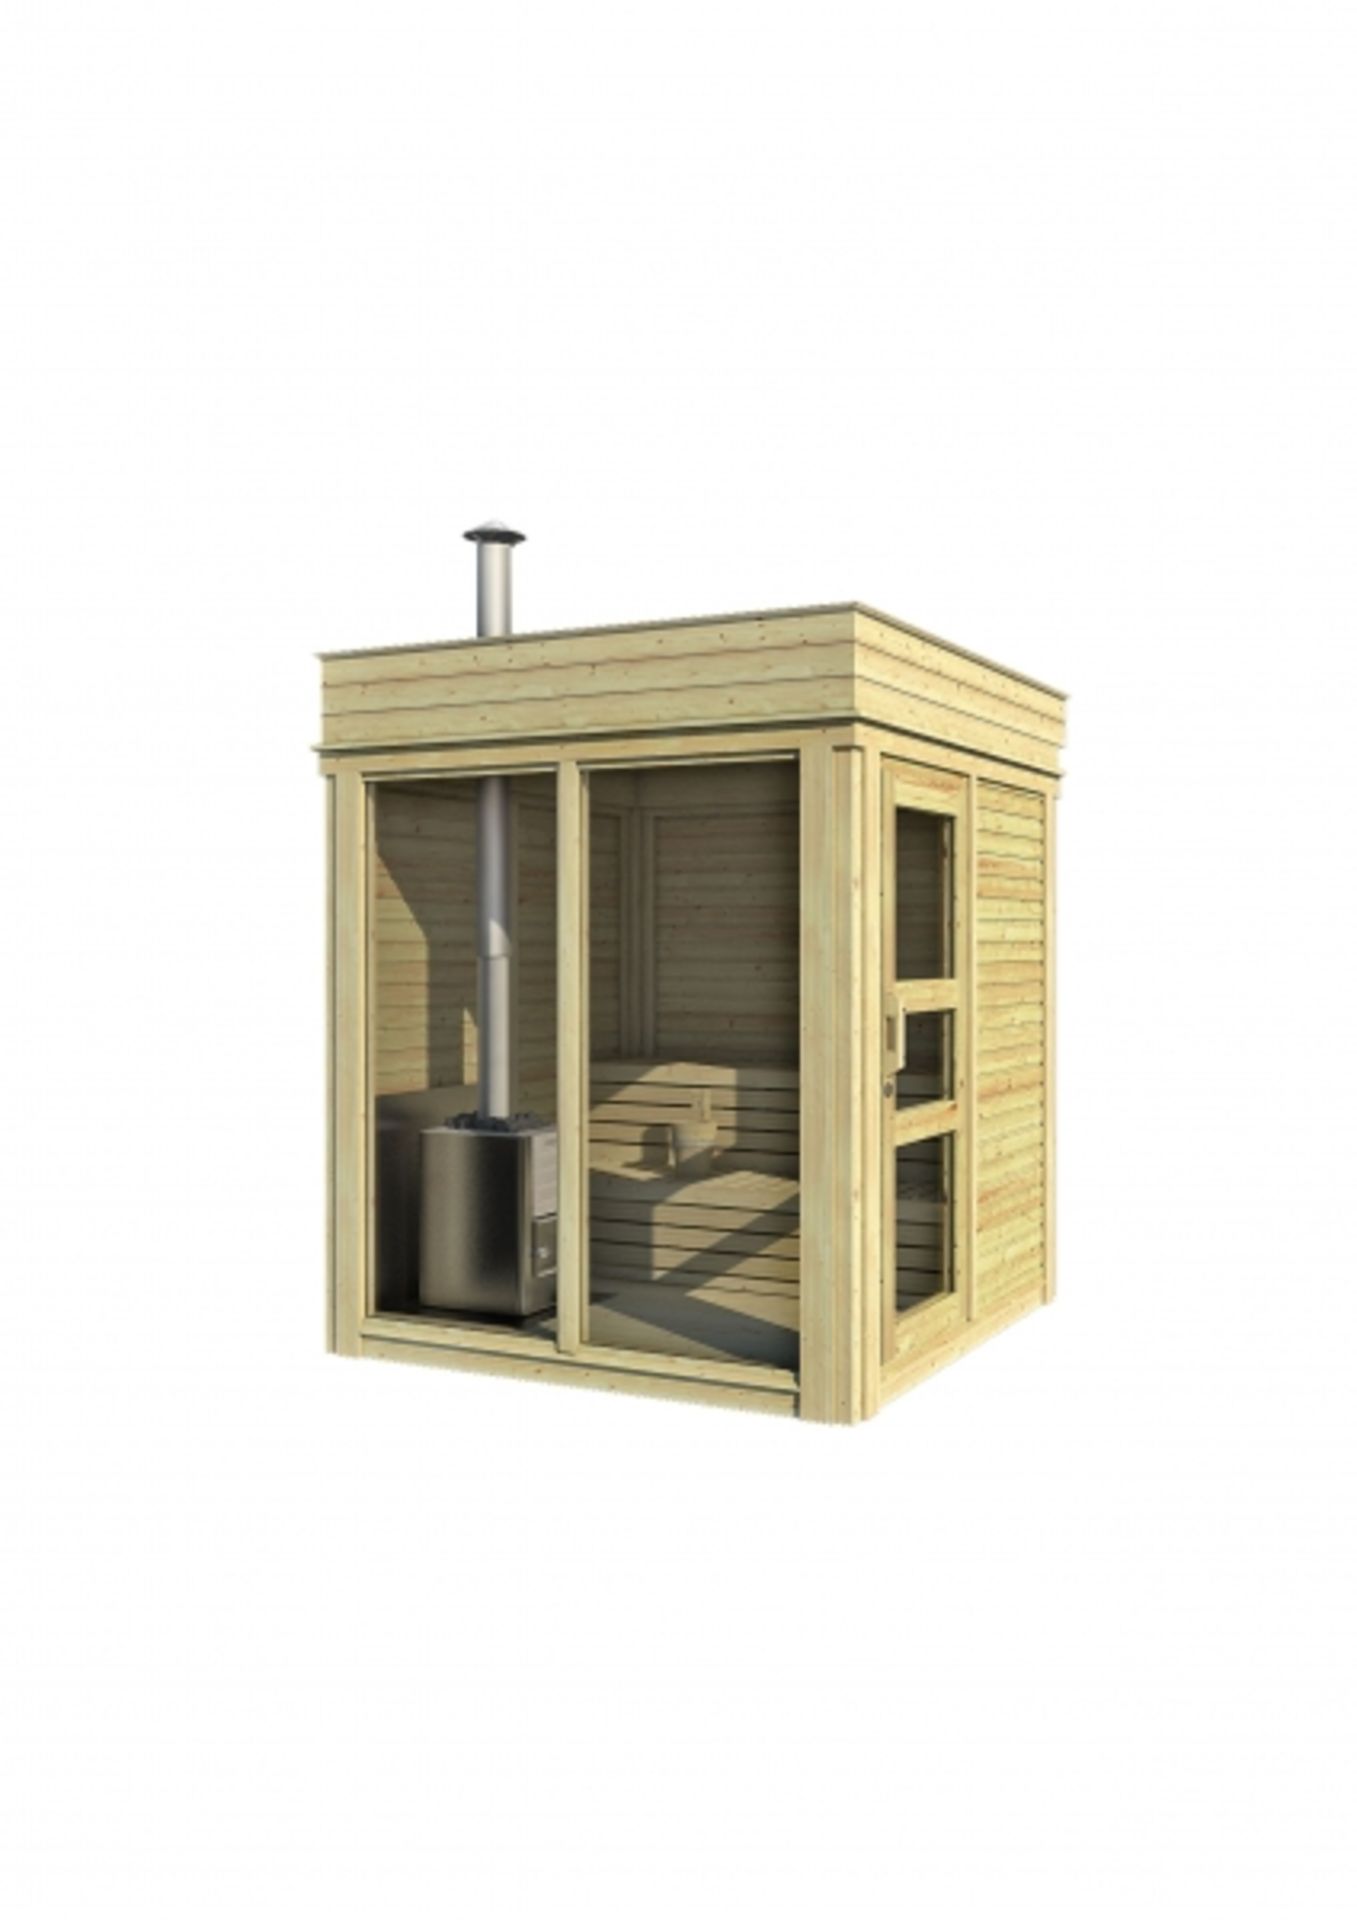 + VAT Brand New 2 x 2m Sauna Cube - Made From Spruce Wood - Roof Covered With Black Bitumen Weld